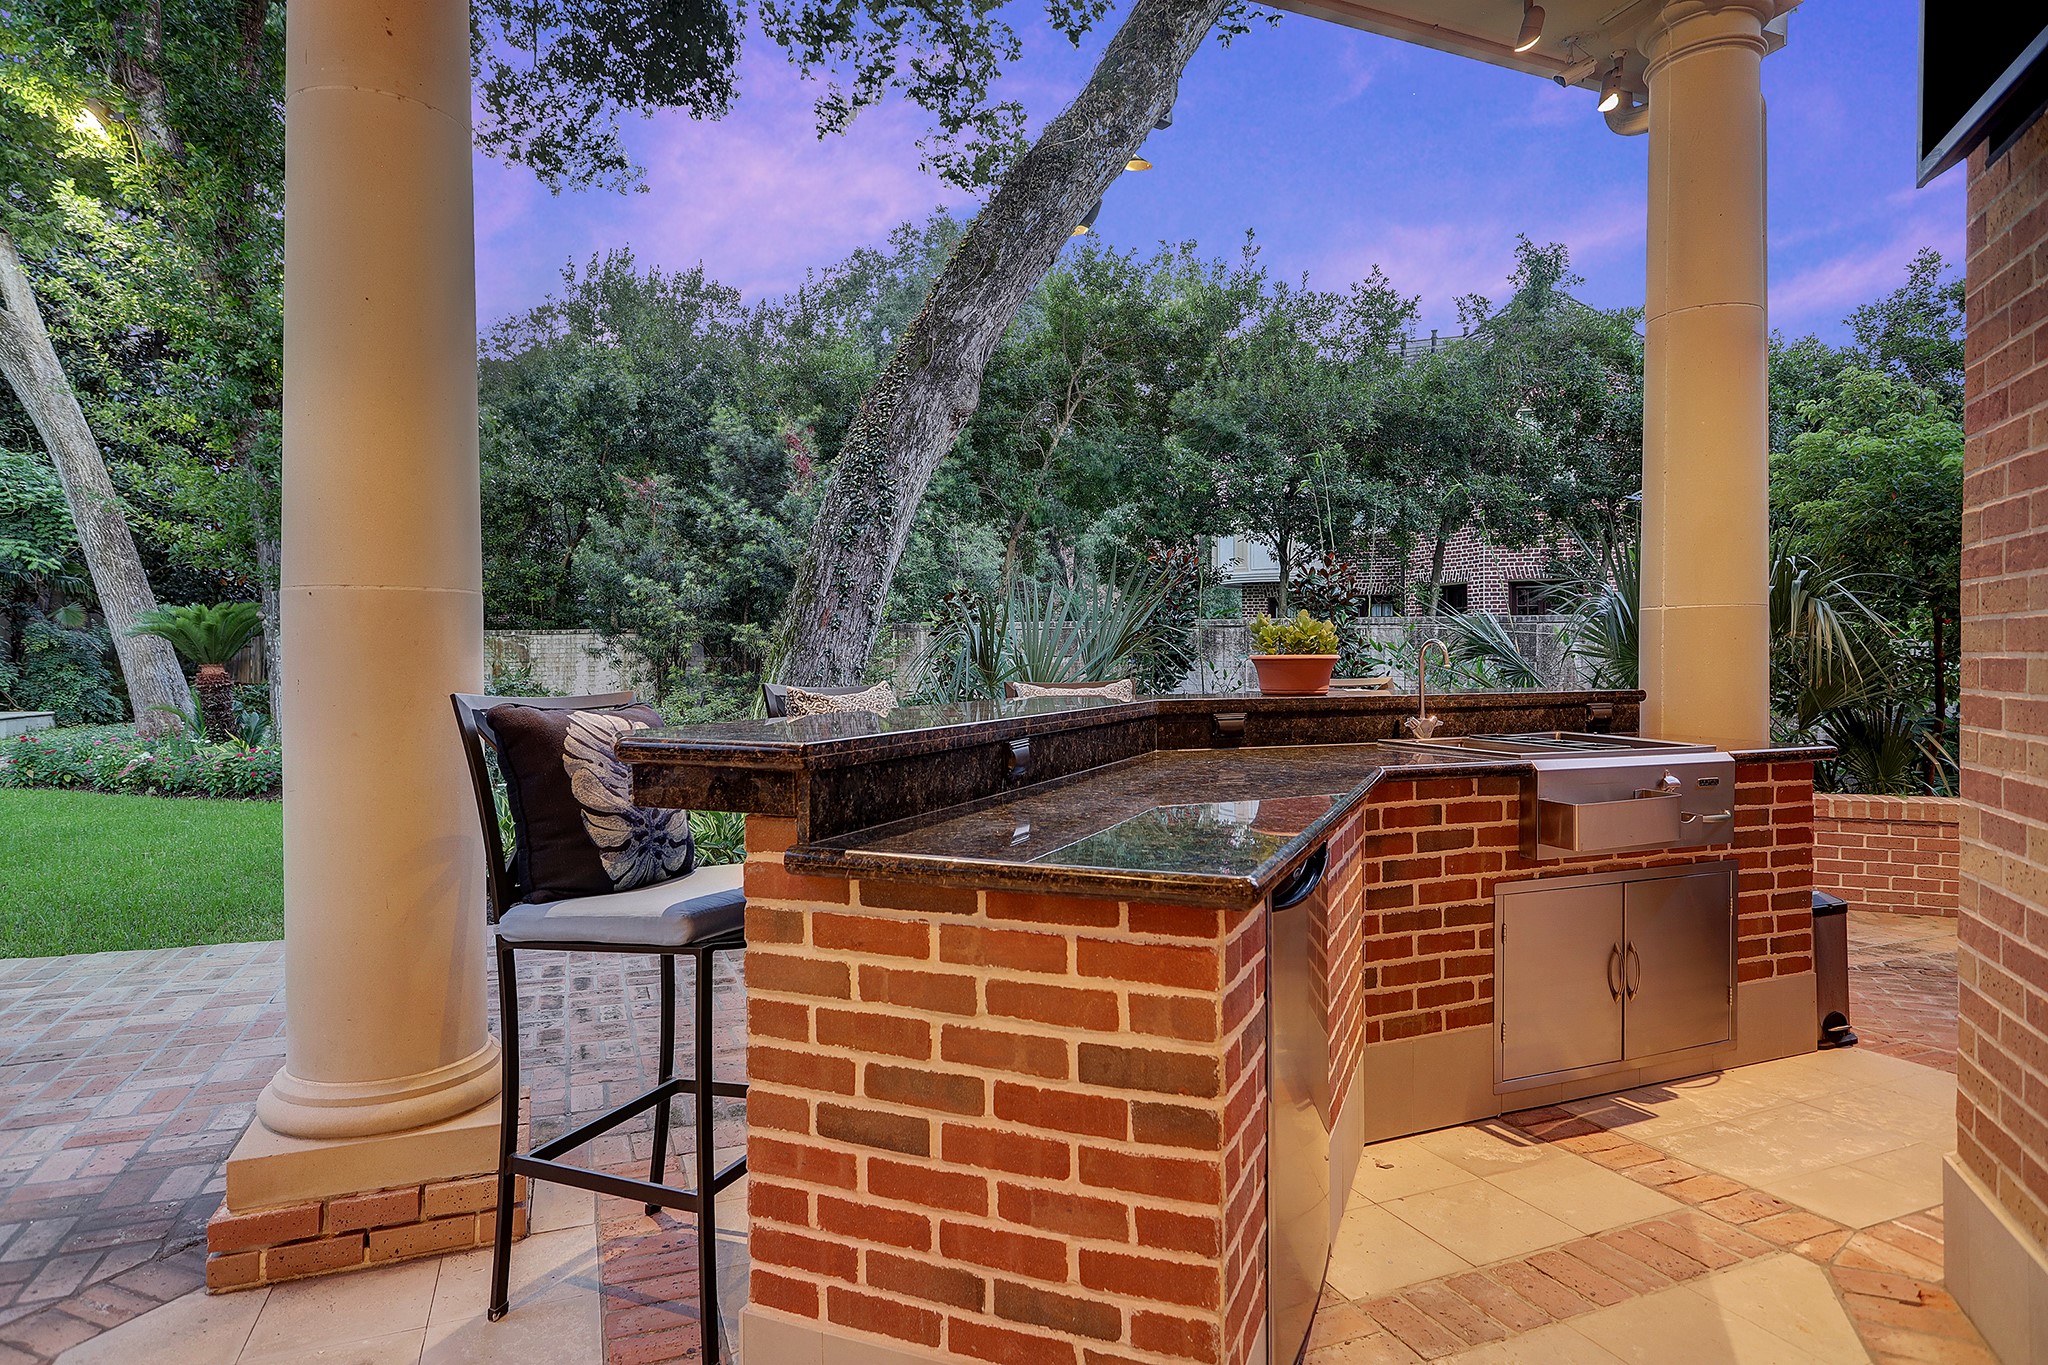 Outdoor kitchen with built-in Calise gas grill and LUXOR sink.